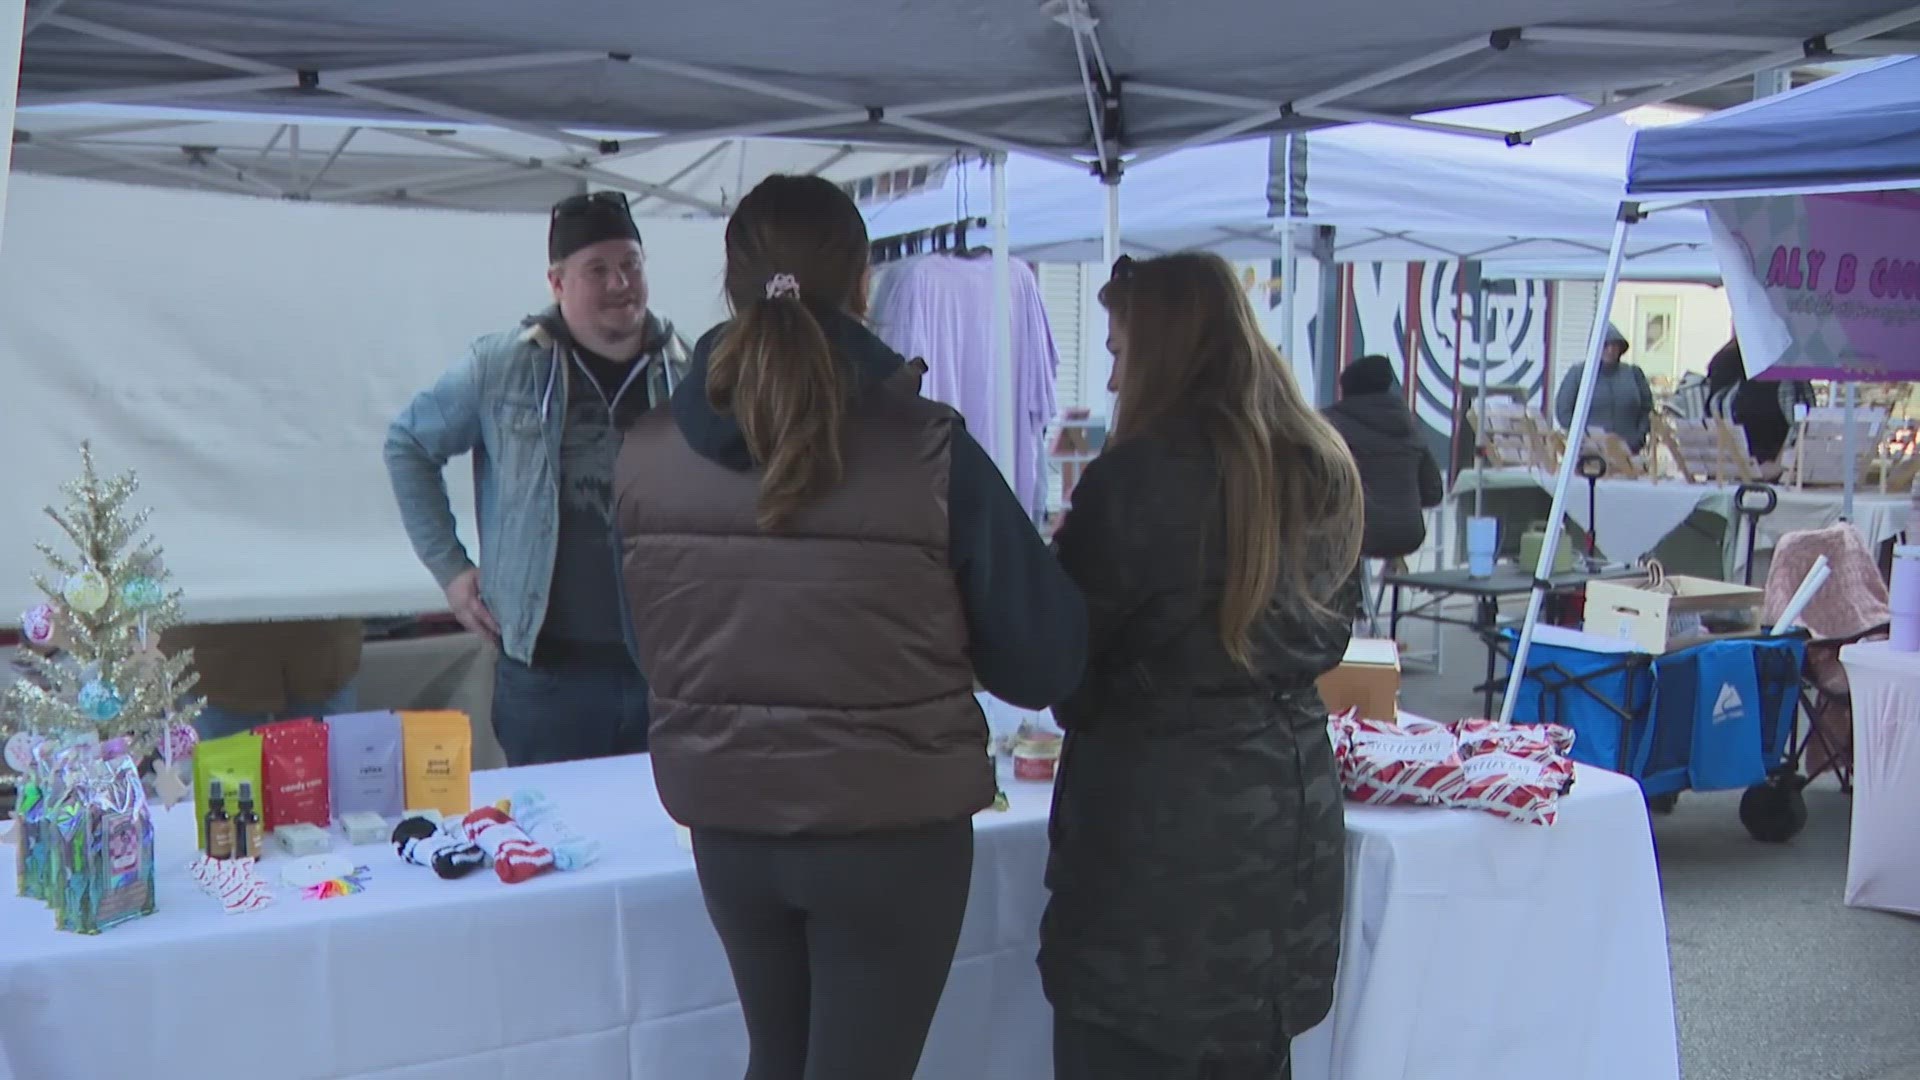 The National Retail Federation predicted a turnout of 65.6 million shoppers on Small Business Saturday.